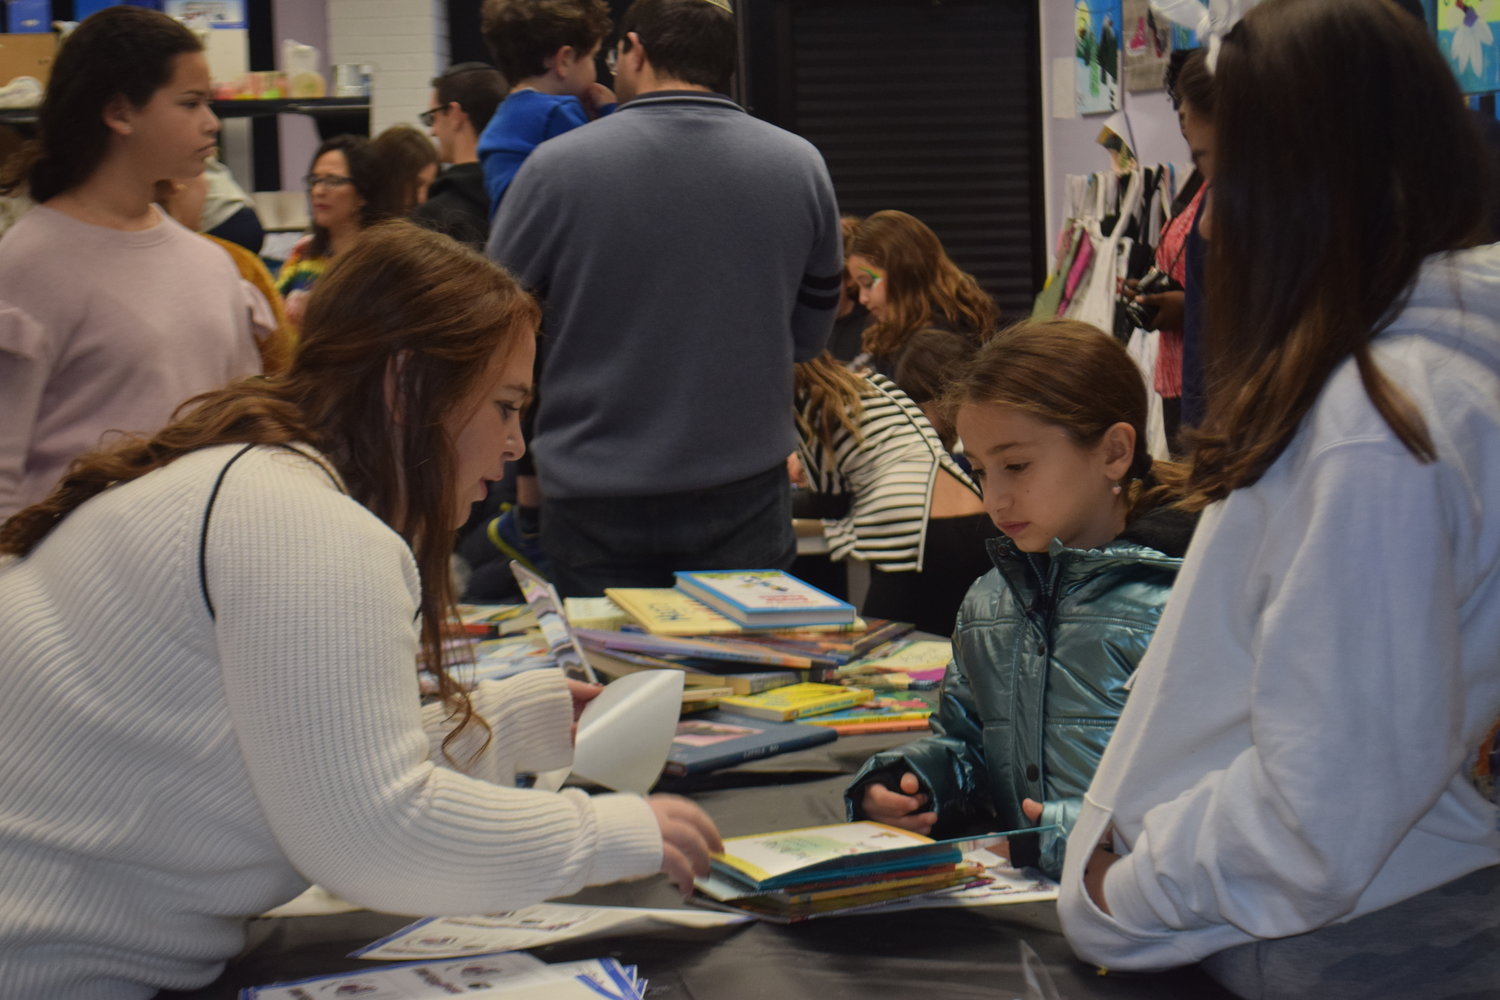 Volunteer Makayla Schein assisted with choosing books at the book fest.